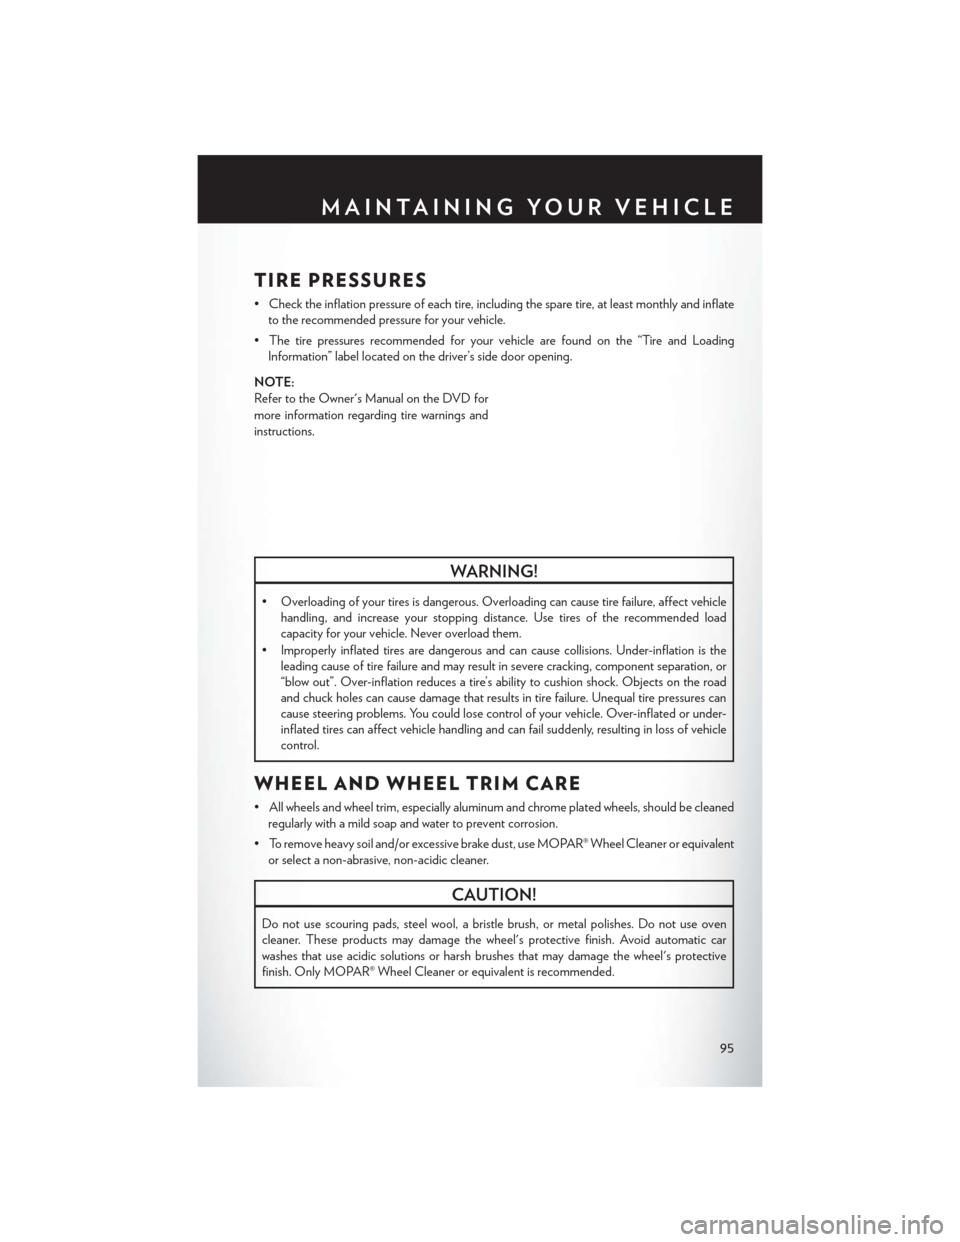 CHRYSLER 200 2013 1.G Owners Manual TIRE PRESSURES
• Check the inflation pressure of each tire, including the spare tire, at least monthly and inflateto the recommended pressure for your vehicle.
• The tire pressures recommended for